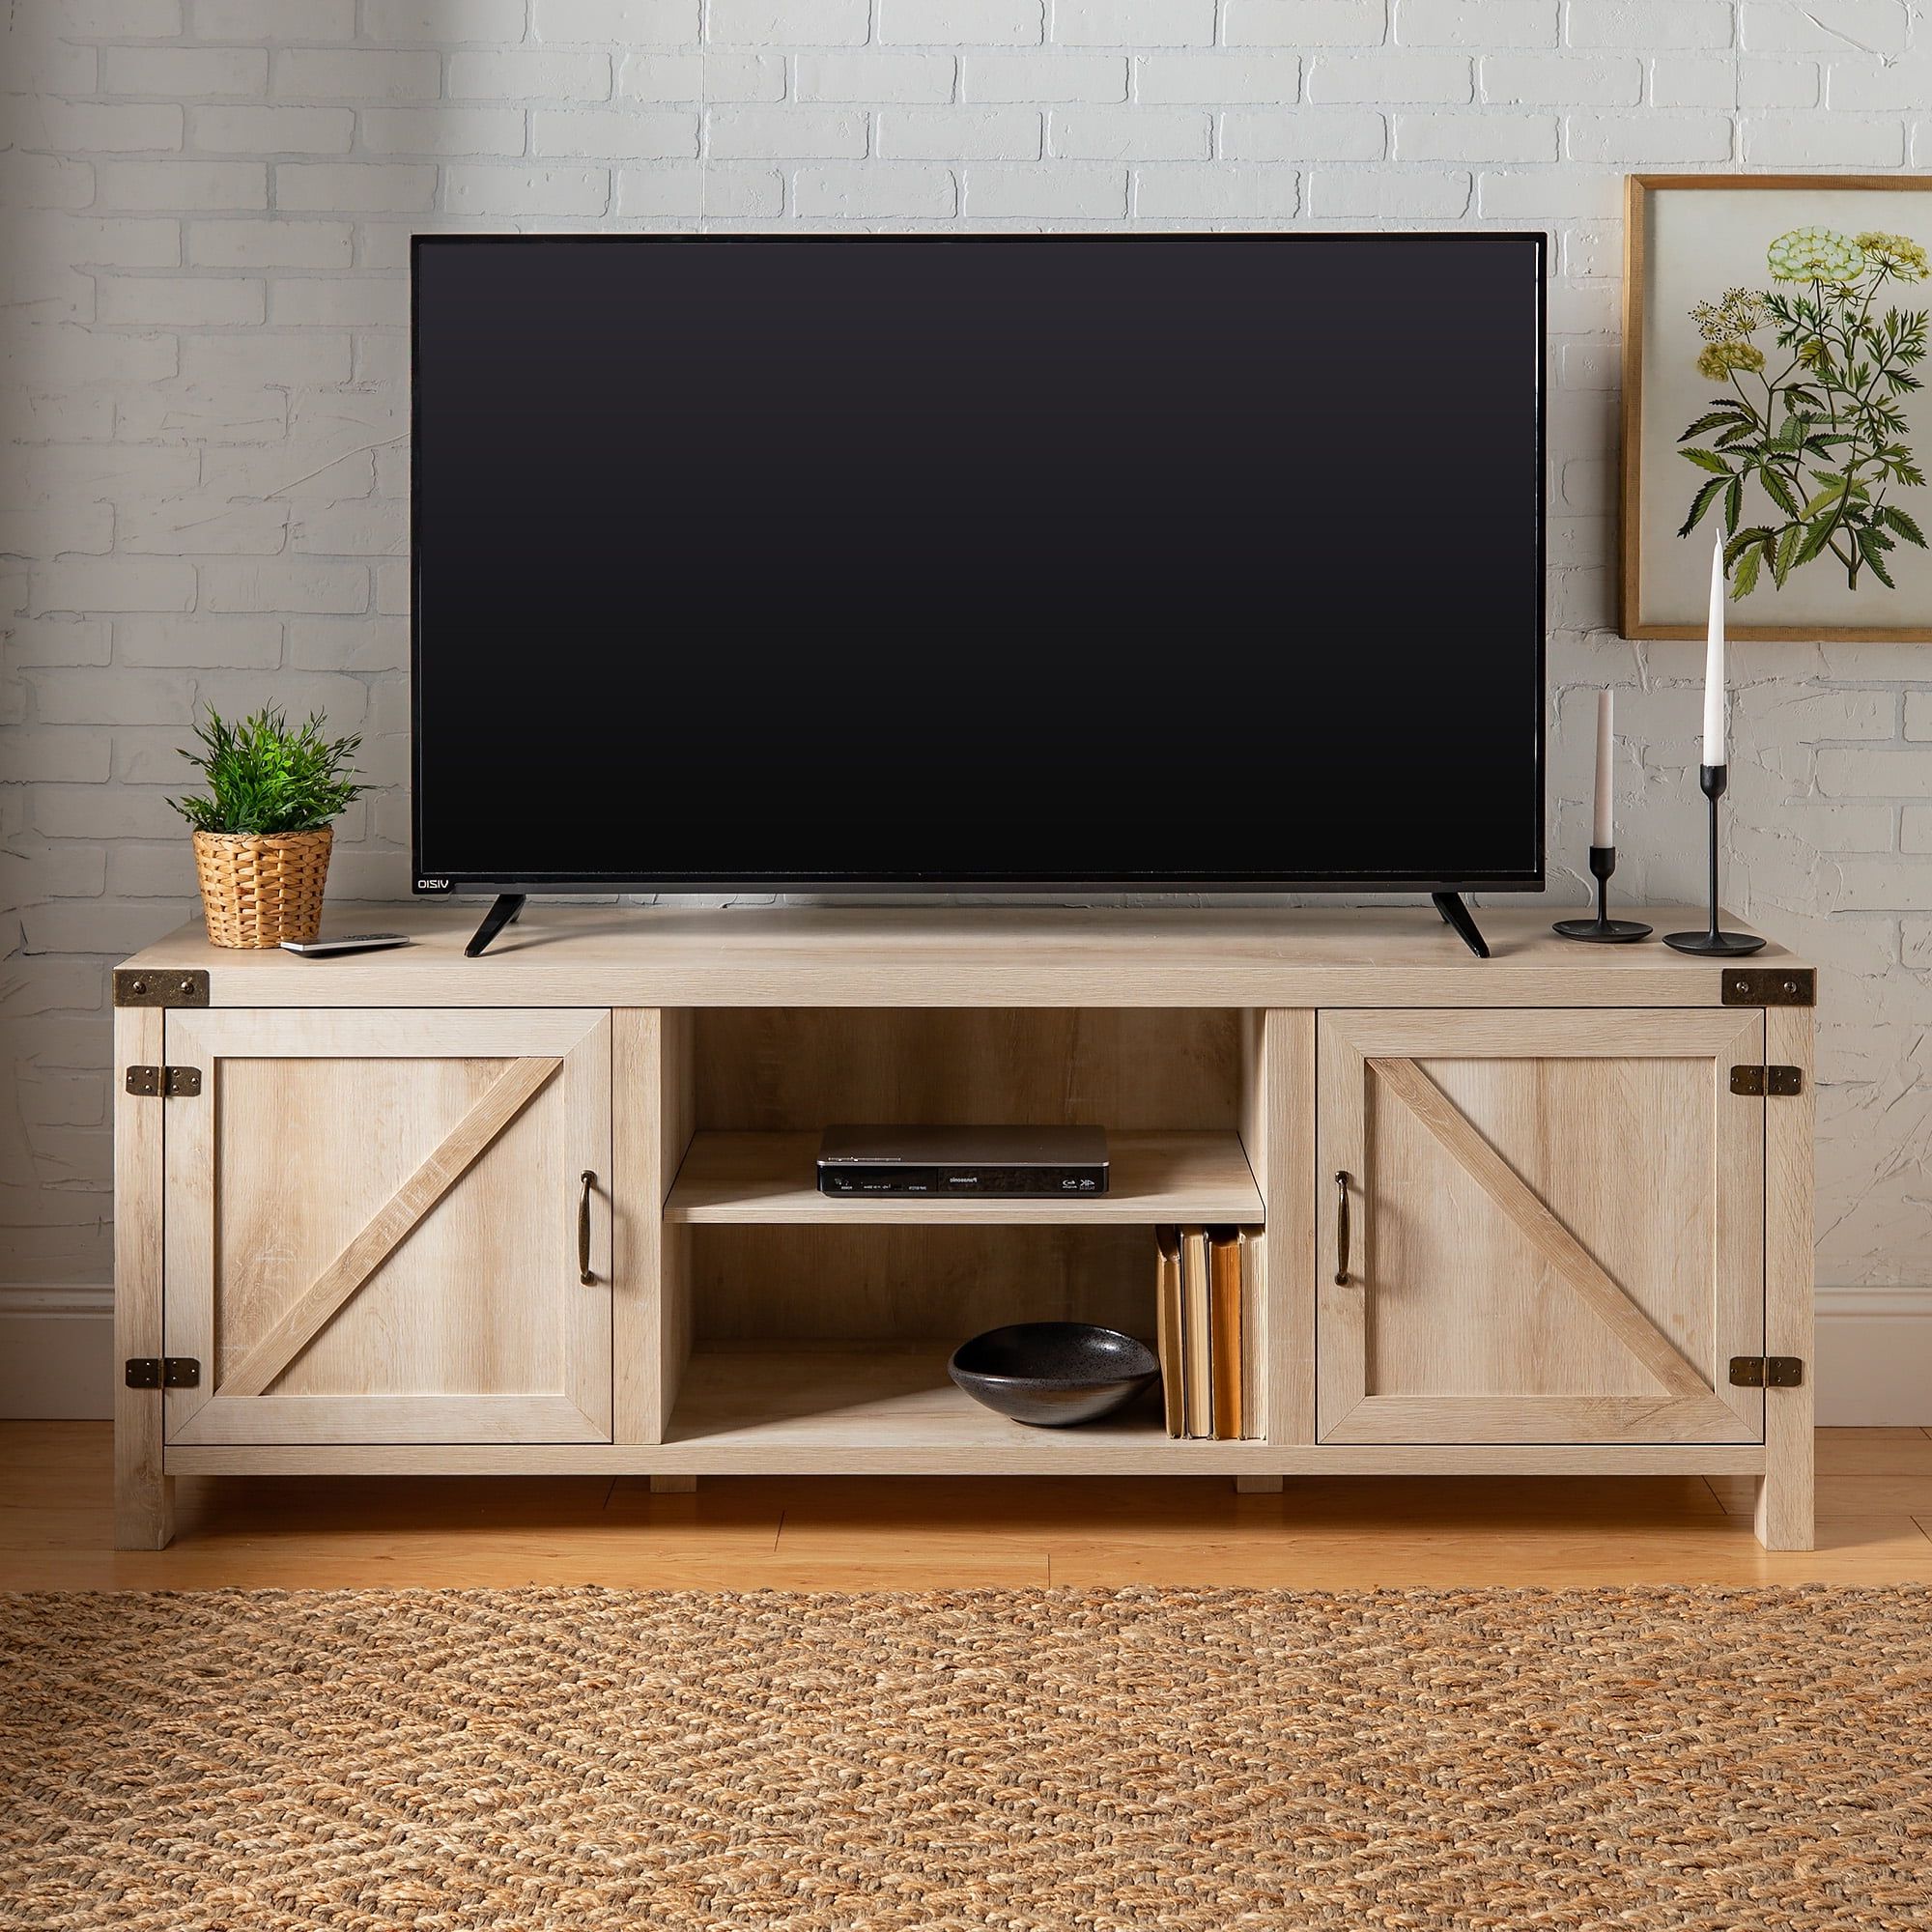 Farmhouse Stands For Tvs Within Favorite Woven Paths Farmhouse Barn Door Tv Stand For Tvs Up To 80", White Oak (Photo 2 of 15)